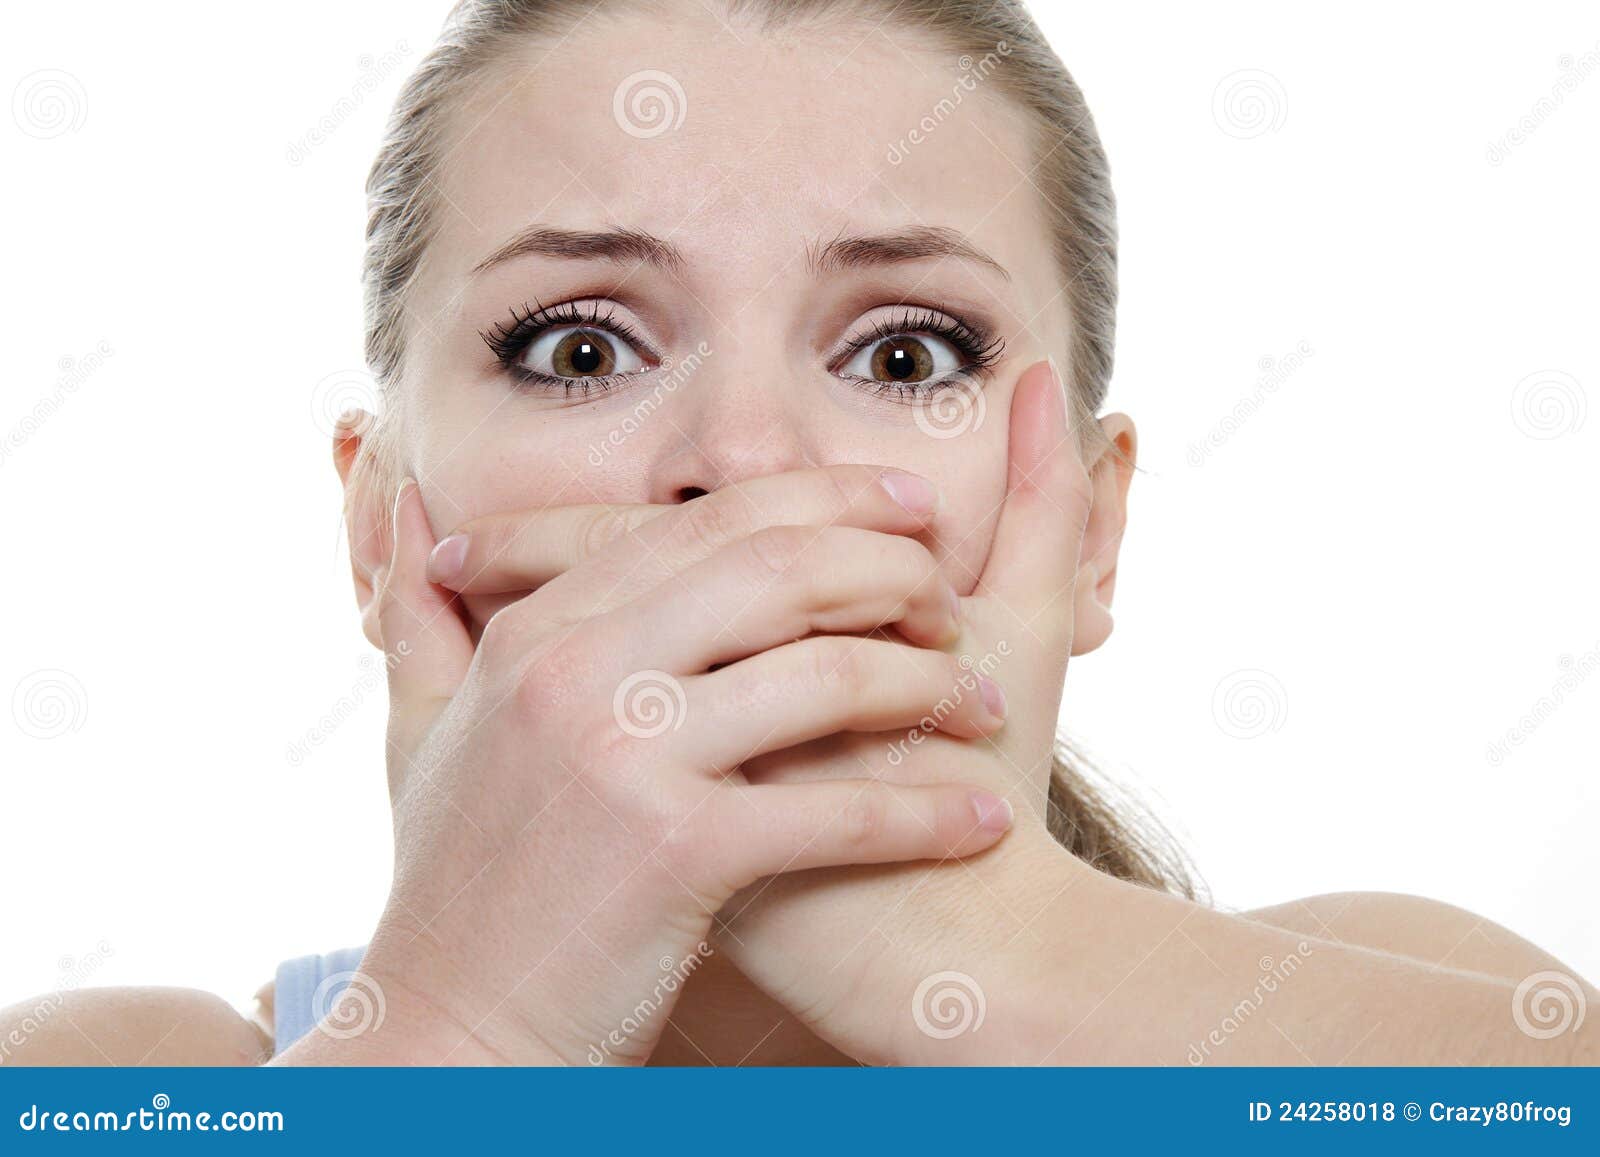 young horrified woman closing her mouth with hands